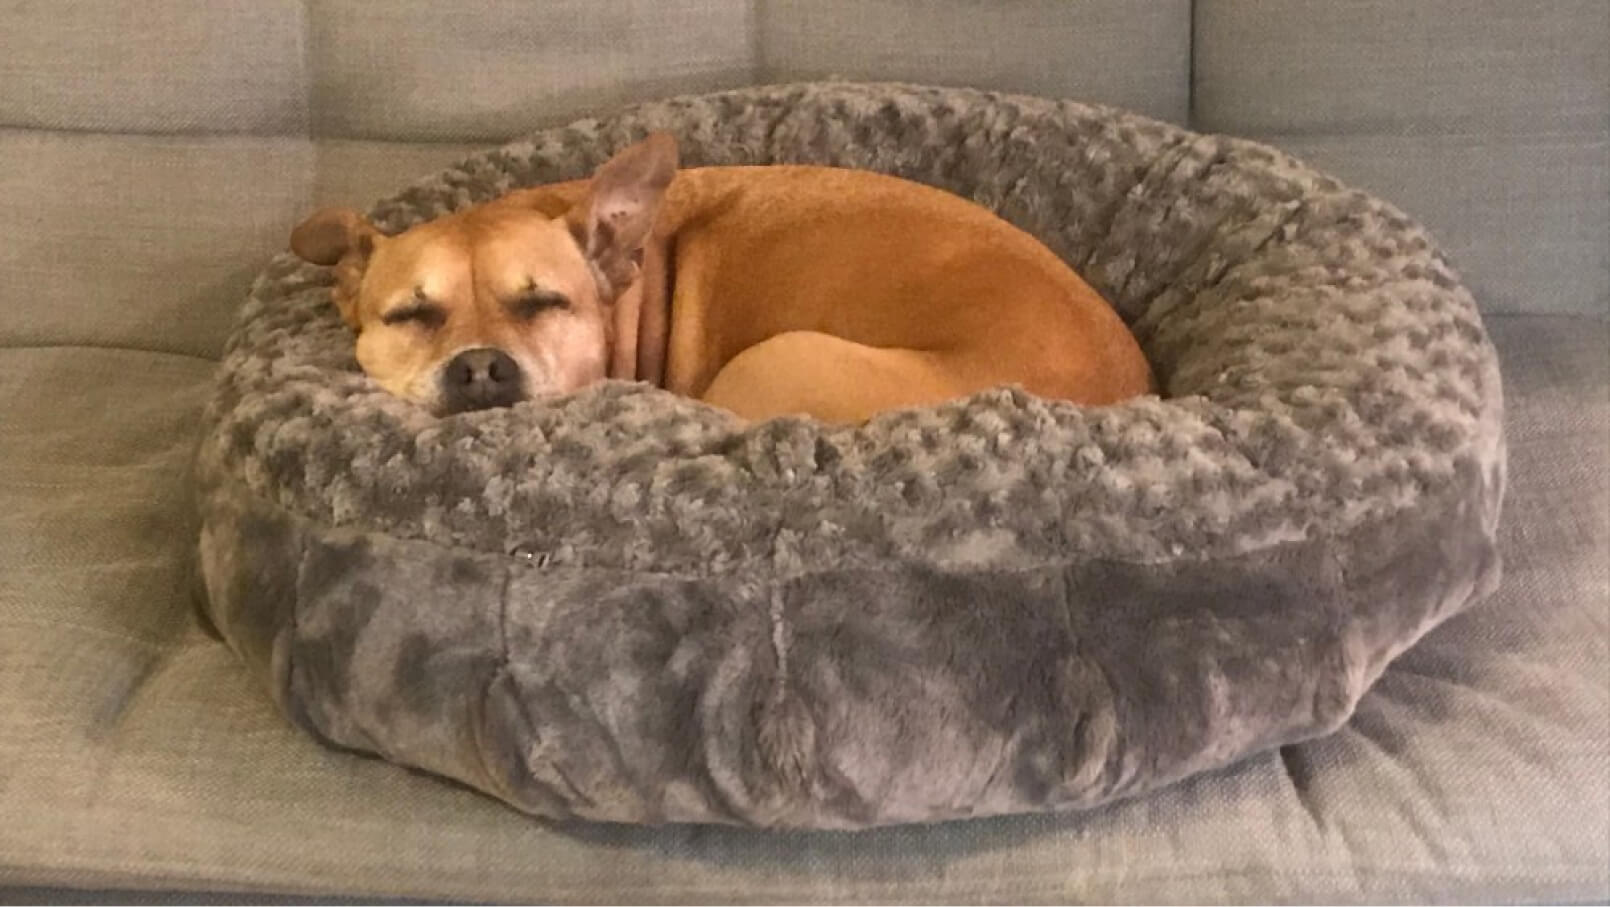 A light brown dog sleeping peacefully in a soft plush circular dog bed.